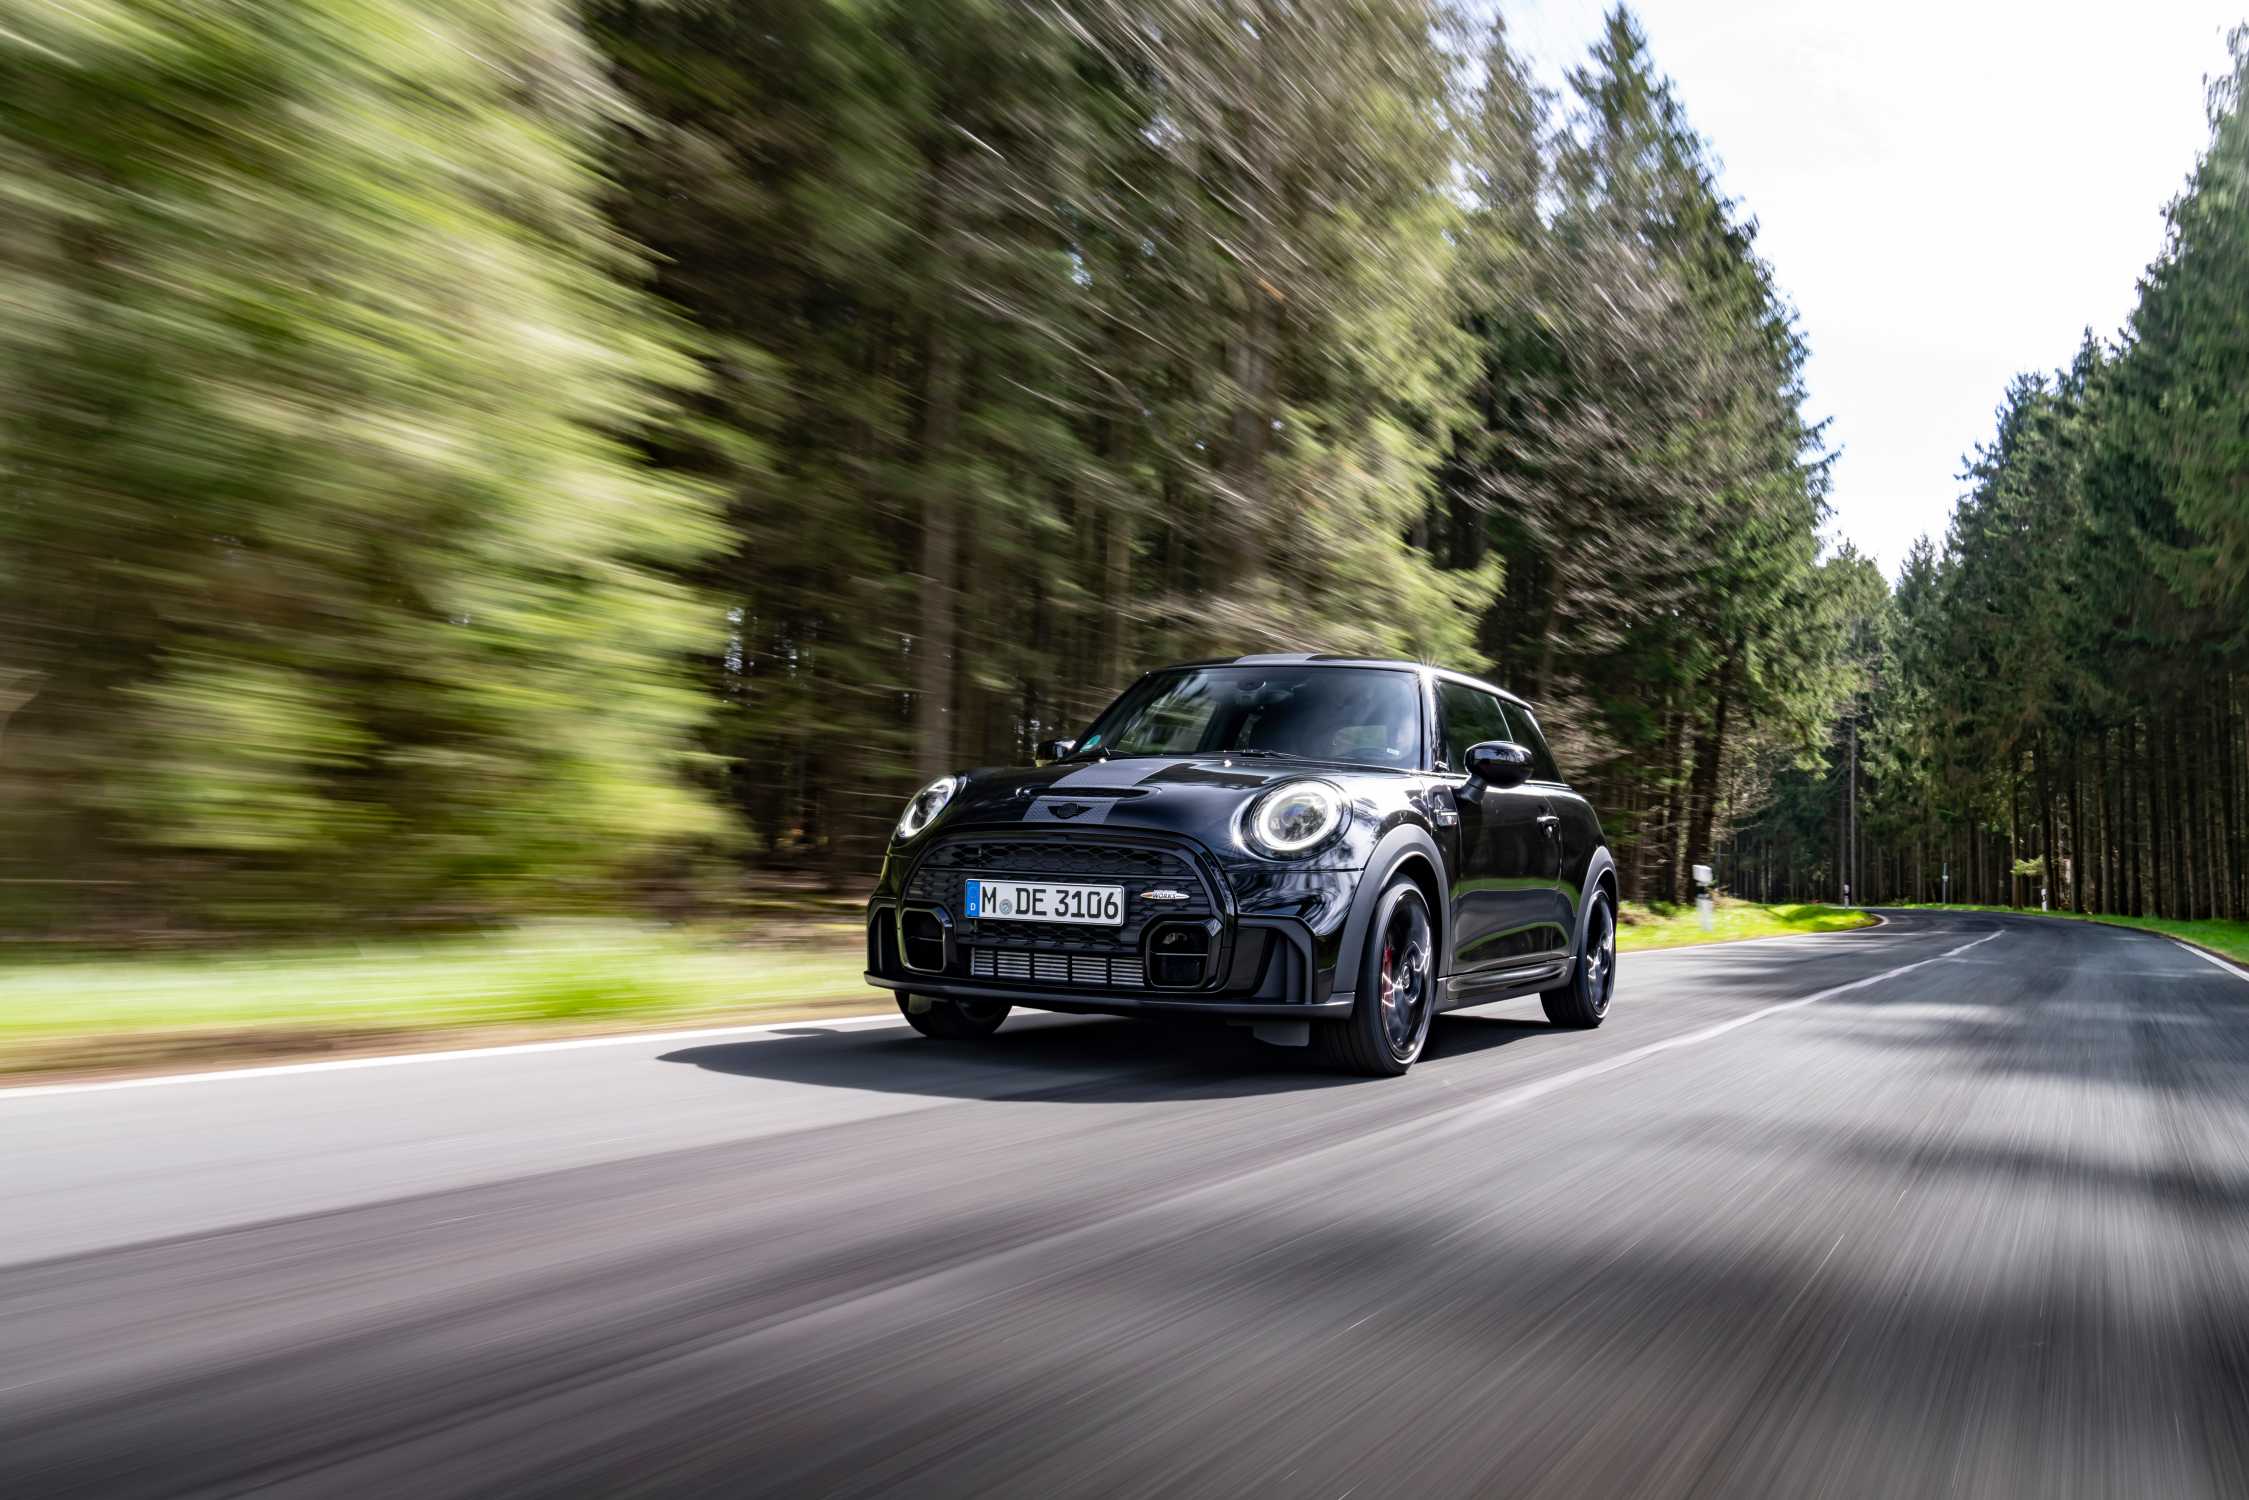 SPECIAL MINI JOHN COOPER WORKS 1TO6 EDITION HIGHLIGHTS FUN OF MANUAL ...